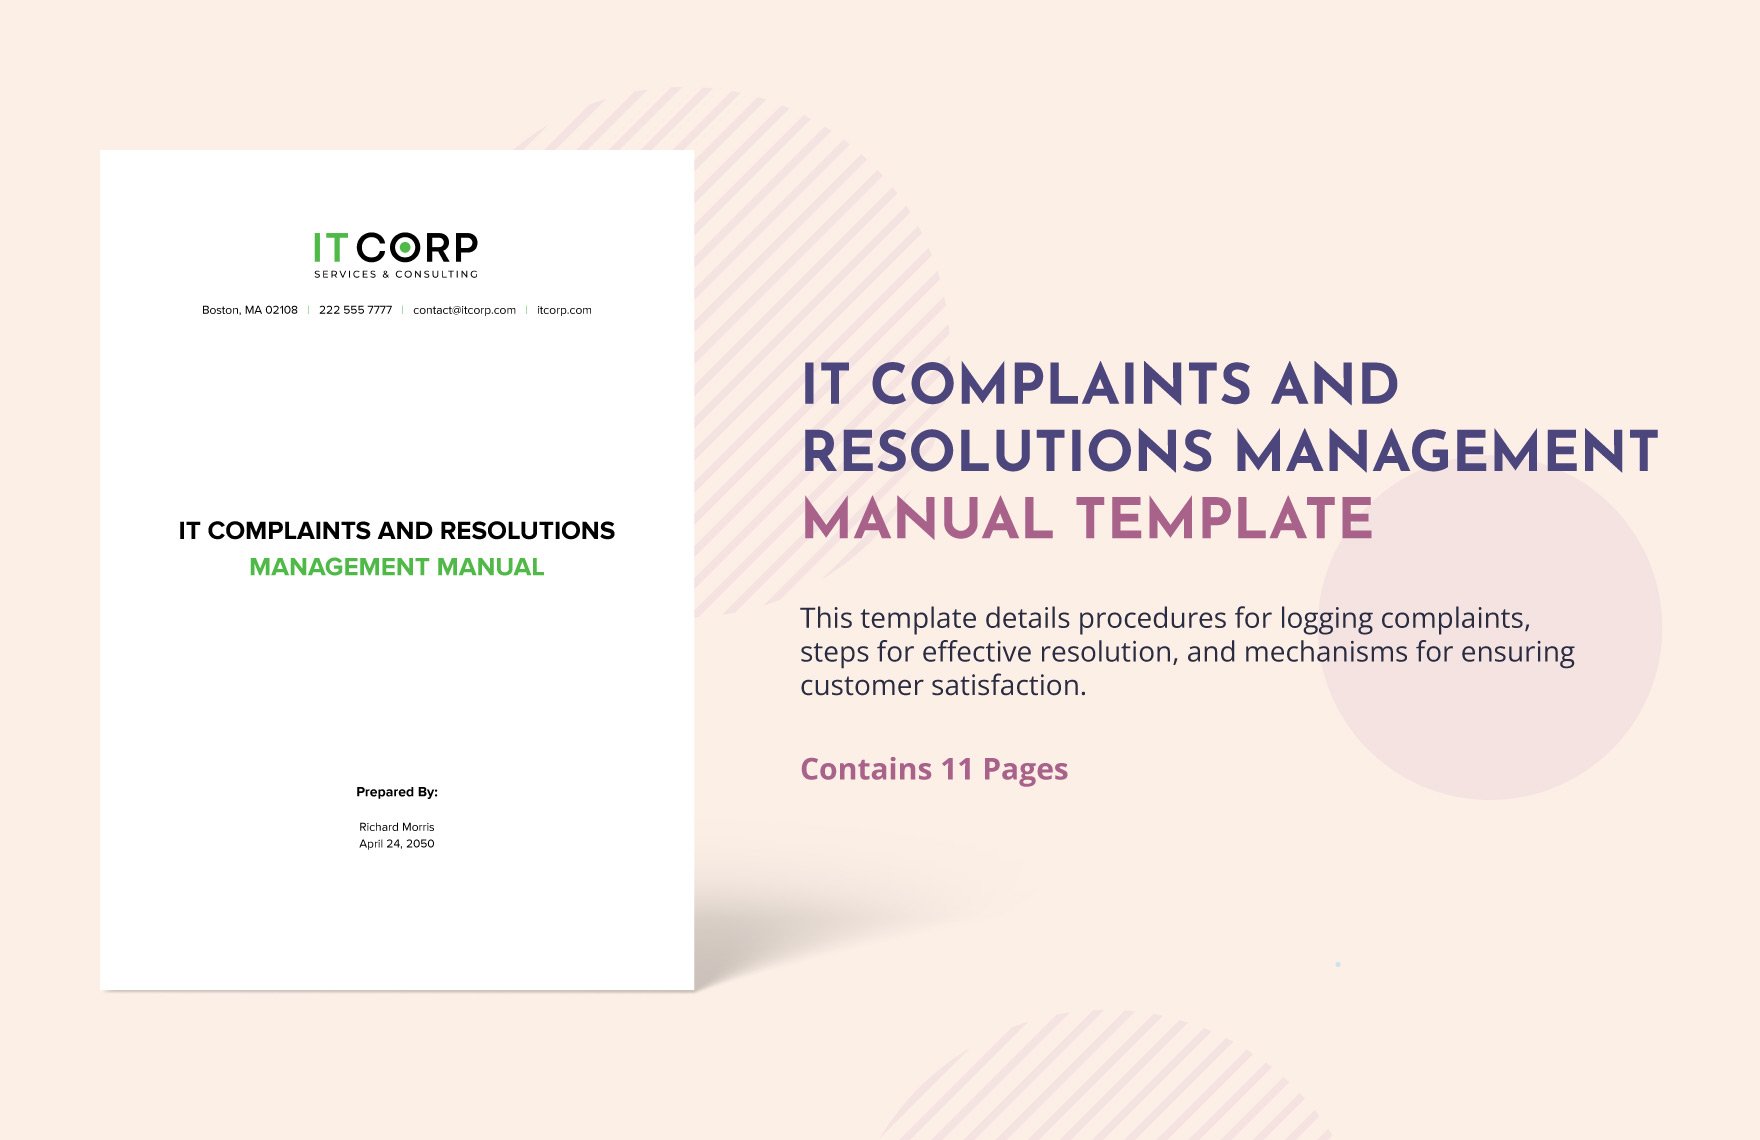 IT Complaints and Resolutions Management Manual Template